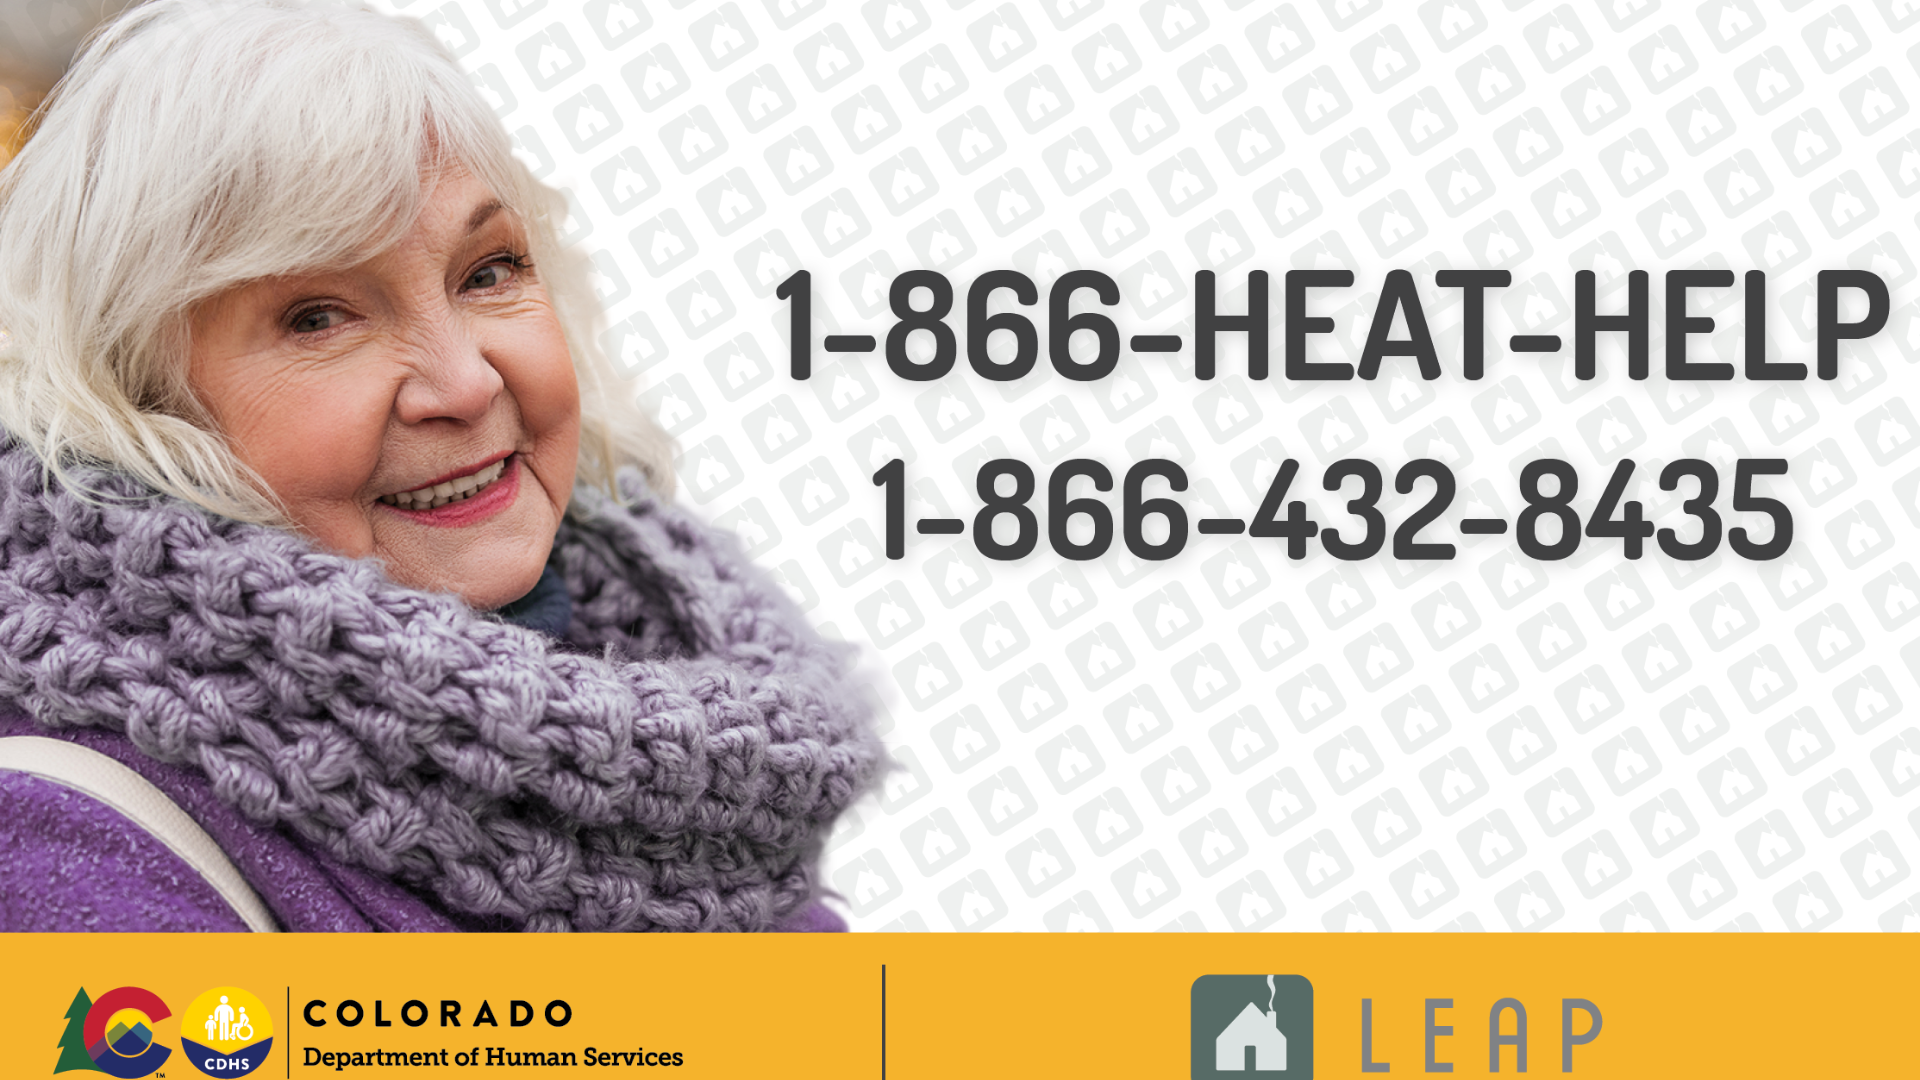 Call 866.432.8435 or visit Colorado.gov/CDHS/Leap to find out about assistance with heating bills this winter.